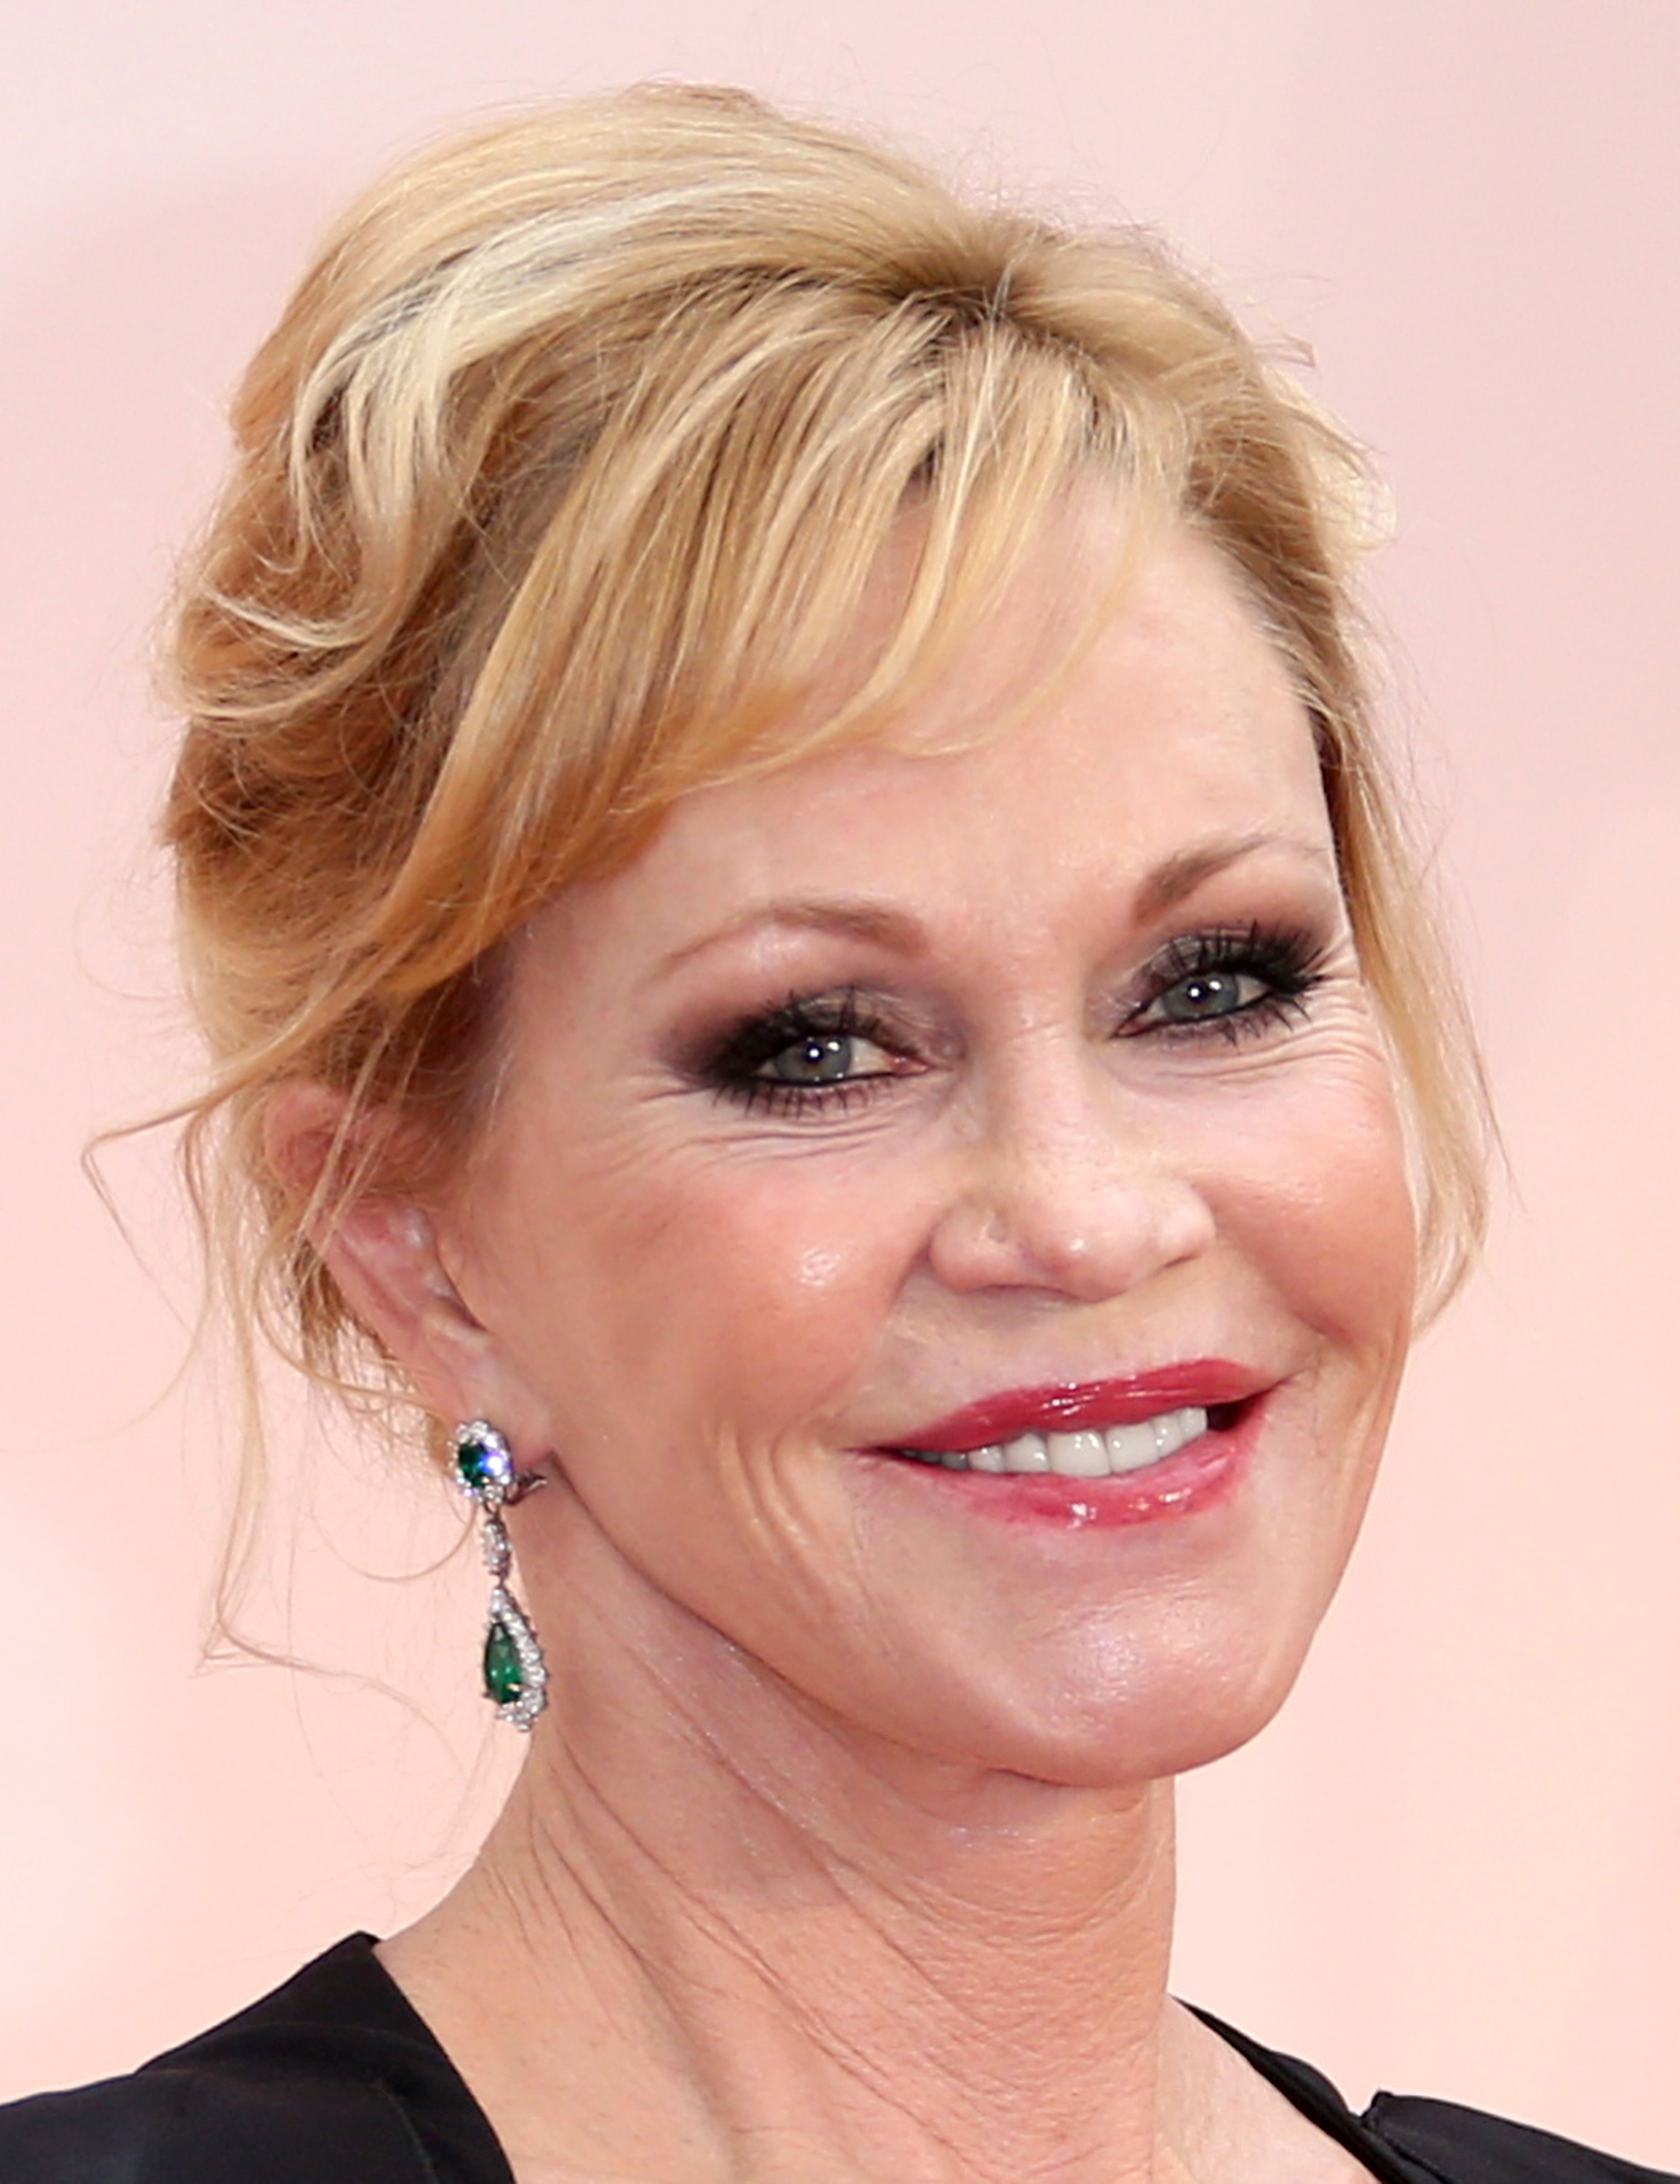 Melanie Griffith at the 87th Annual Academy Awards in Los Angeles, California on February 22, 2015 | Source: Getty Images